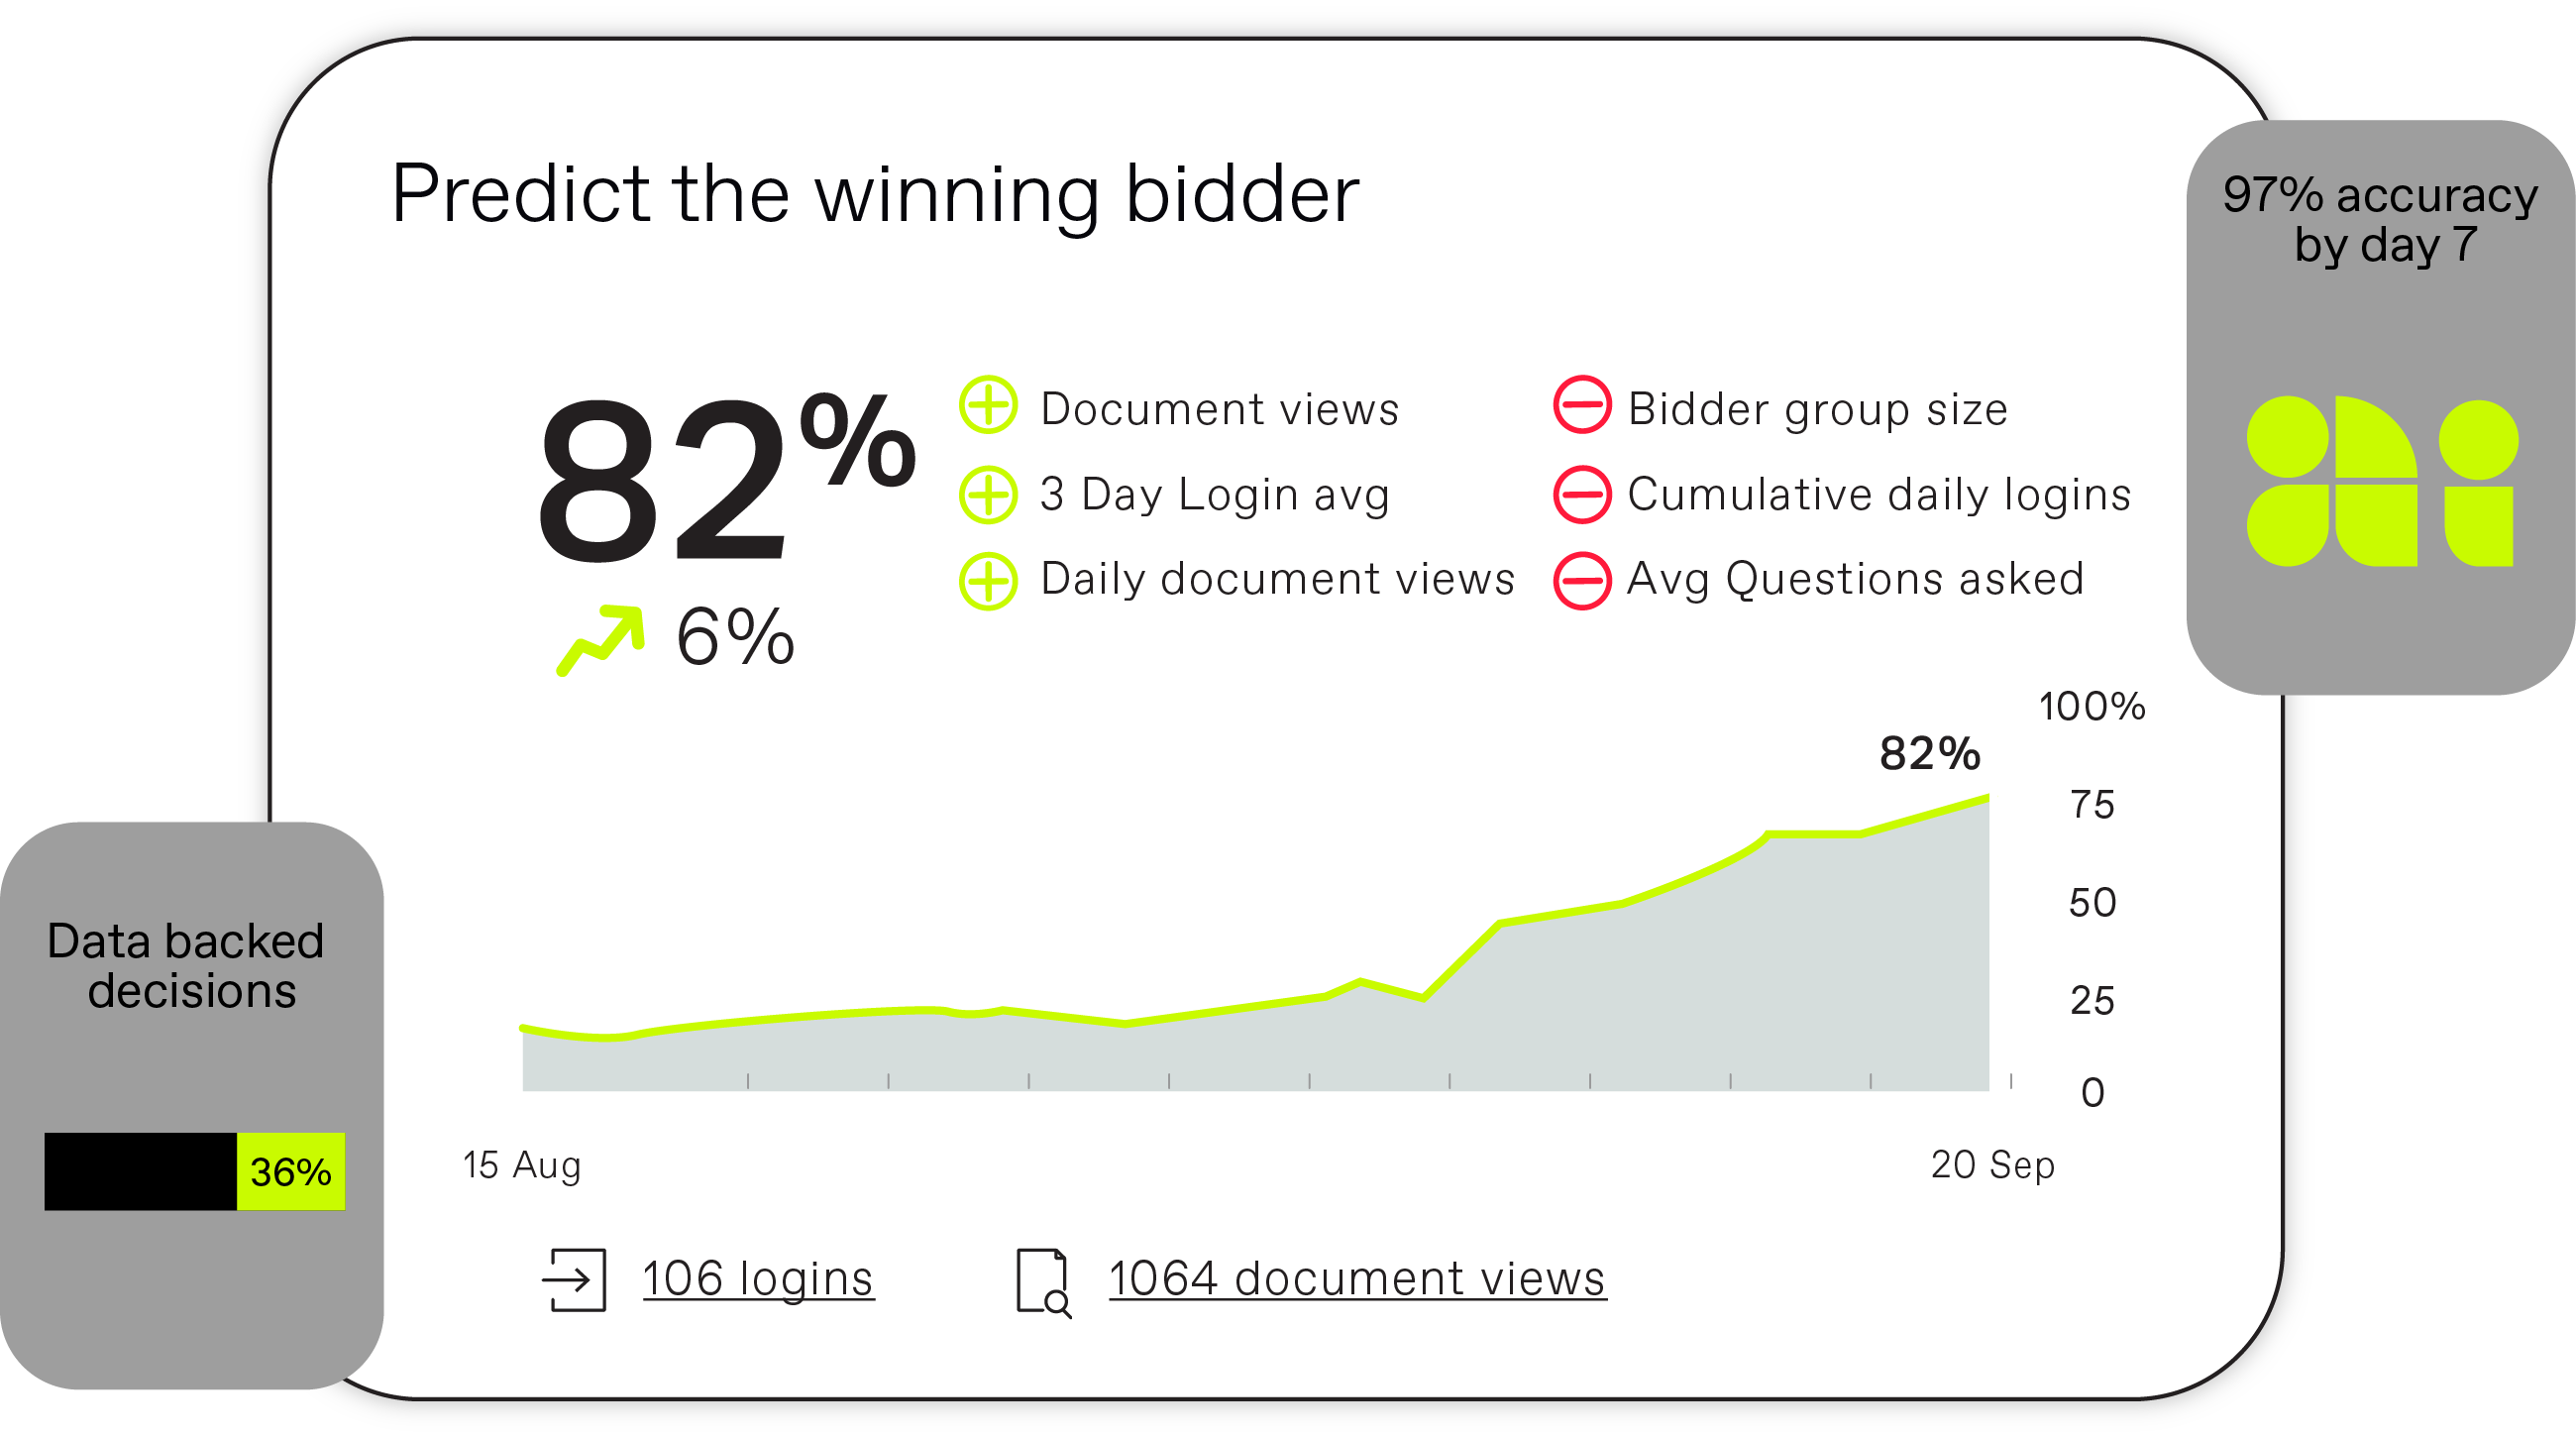 Bidder engagement score predicts with 97% accuracy